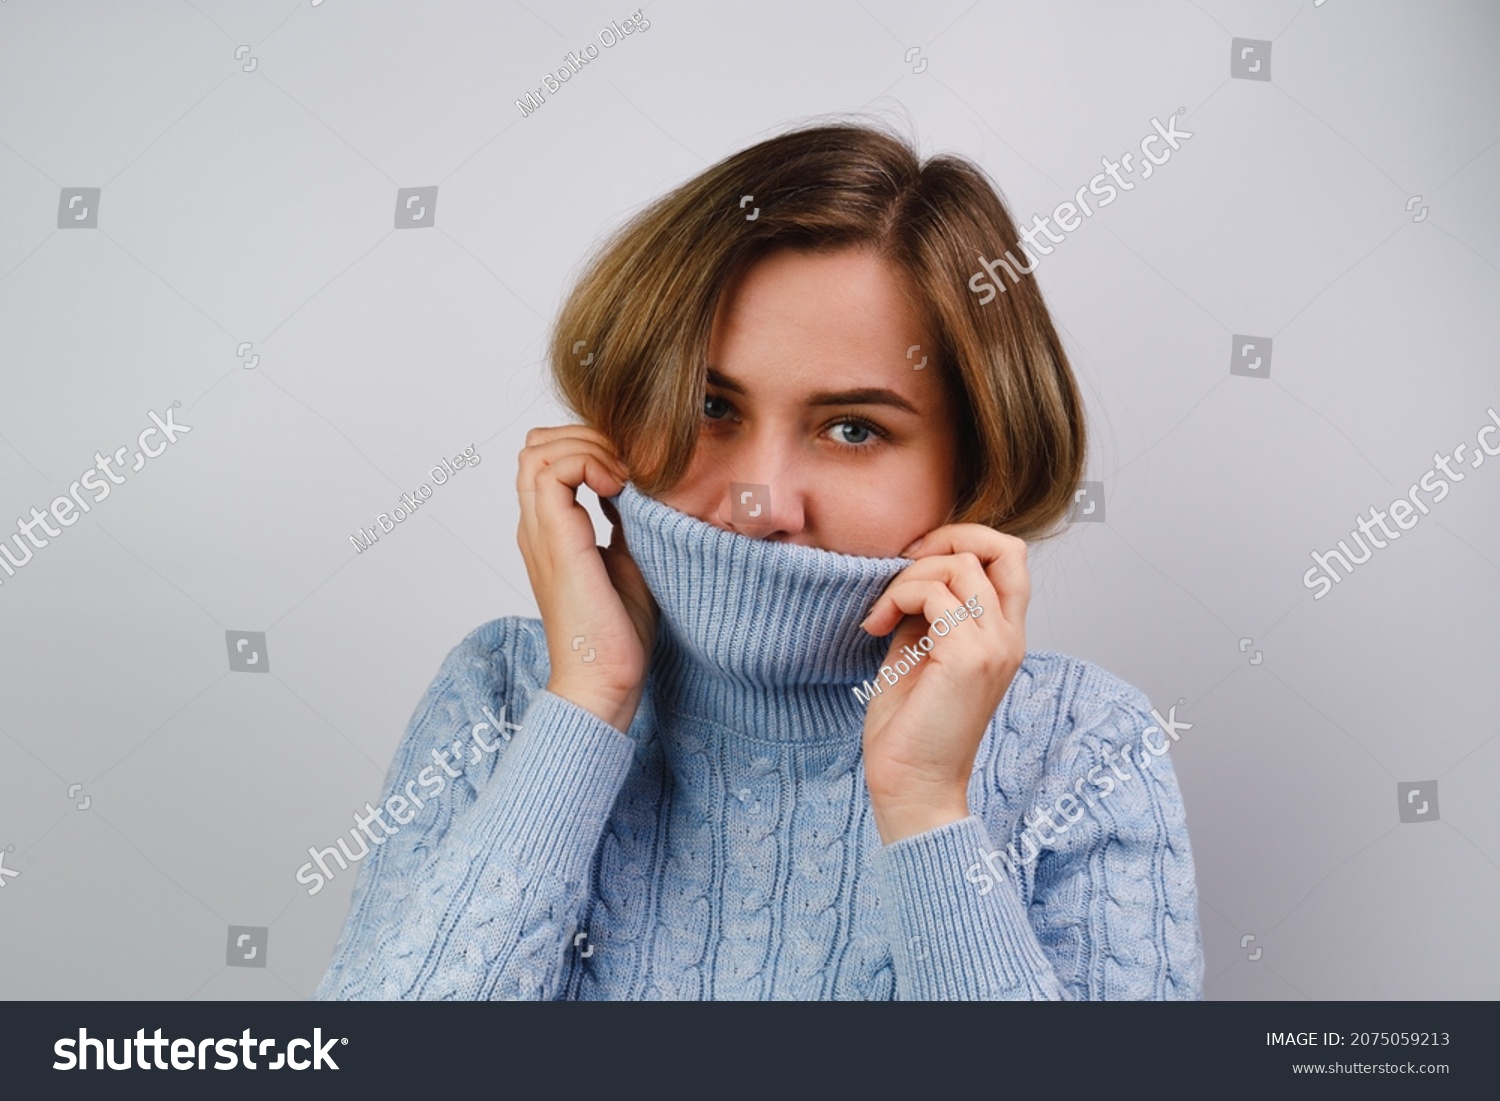 Portrait Girl Pulling Her Sweater Over Stock Photo 2075059213 ...